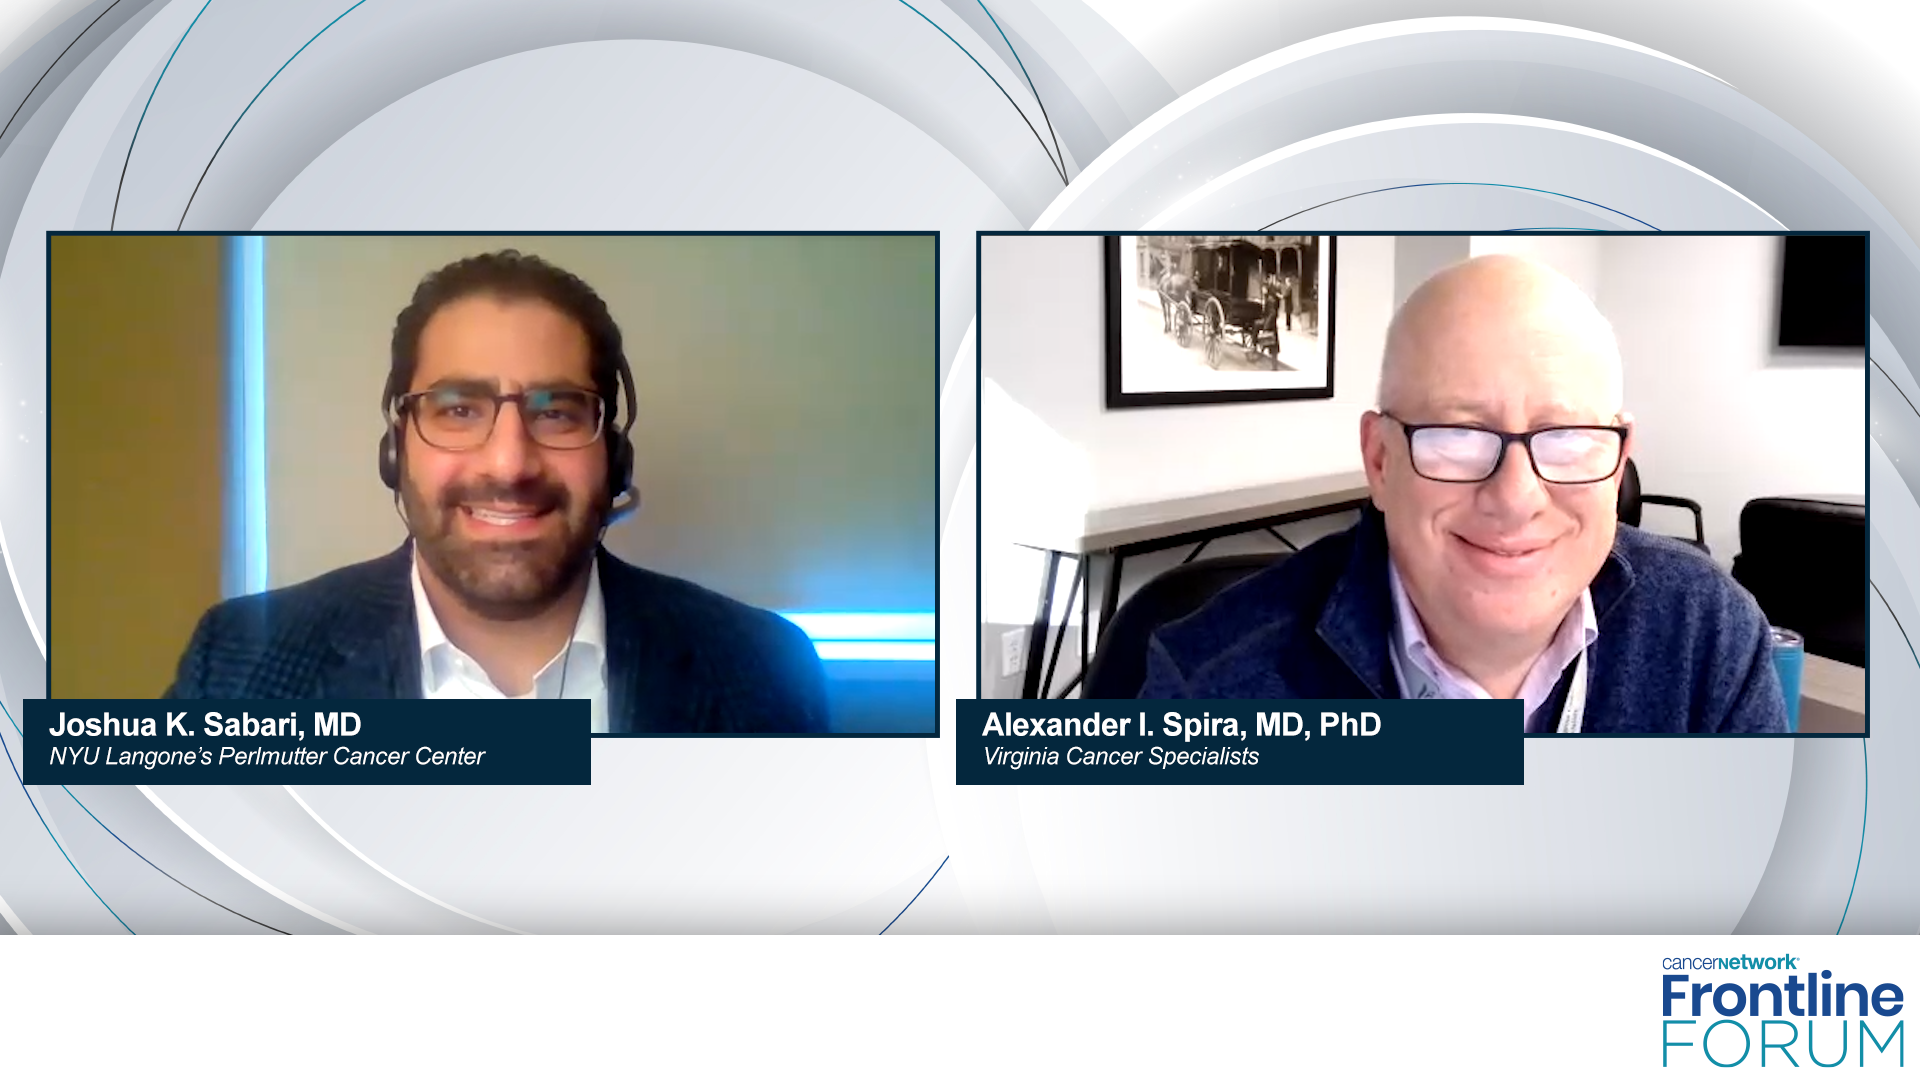 Joshua K. Sabari, MD, and Alexander I. Spira, MD, PhD, experts on non-small cell lung cancer